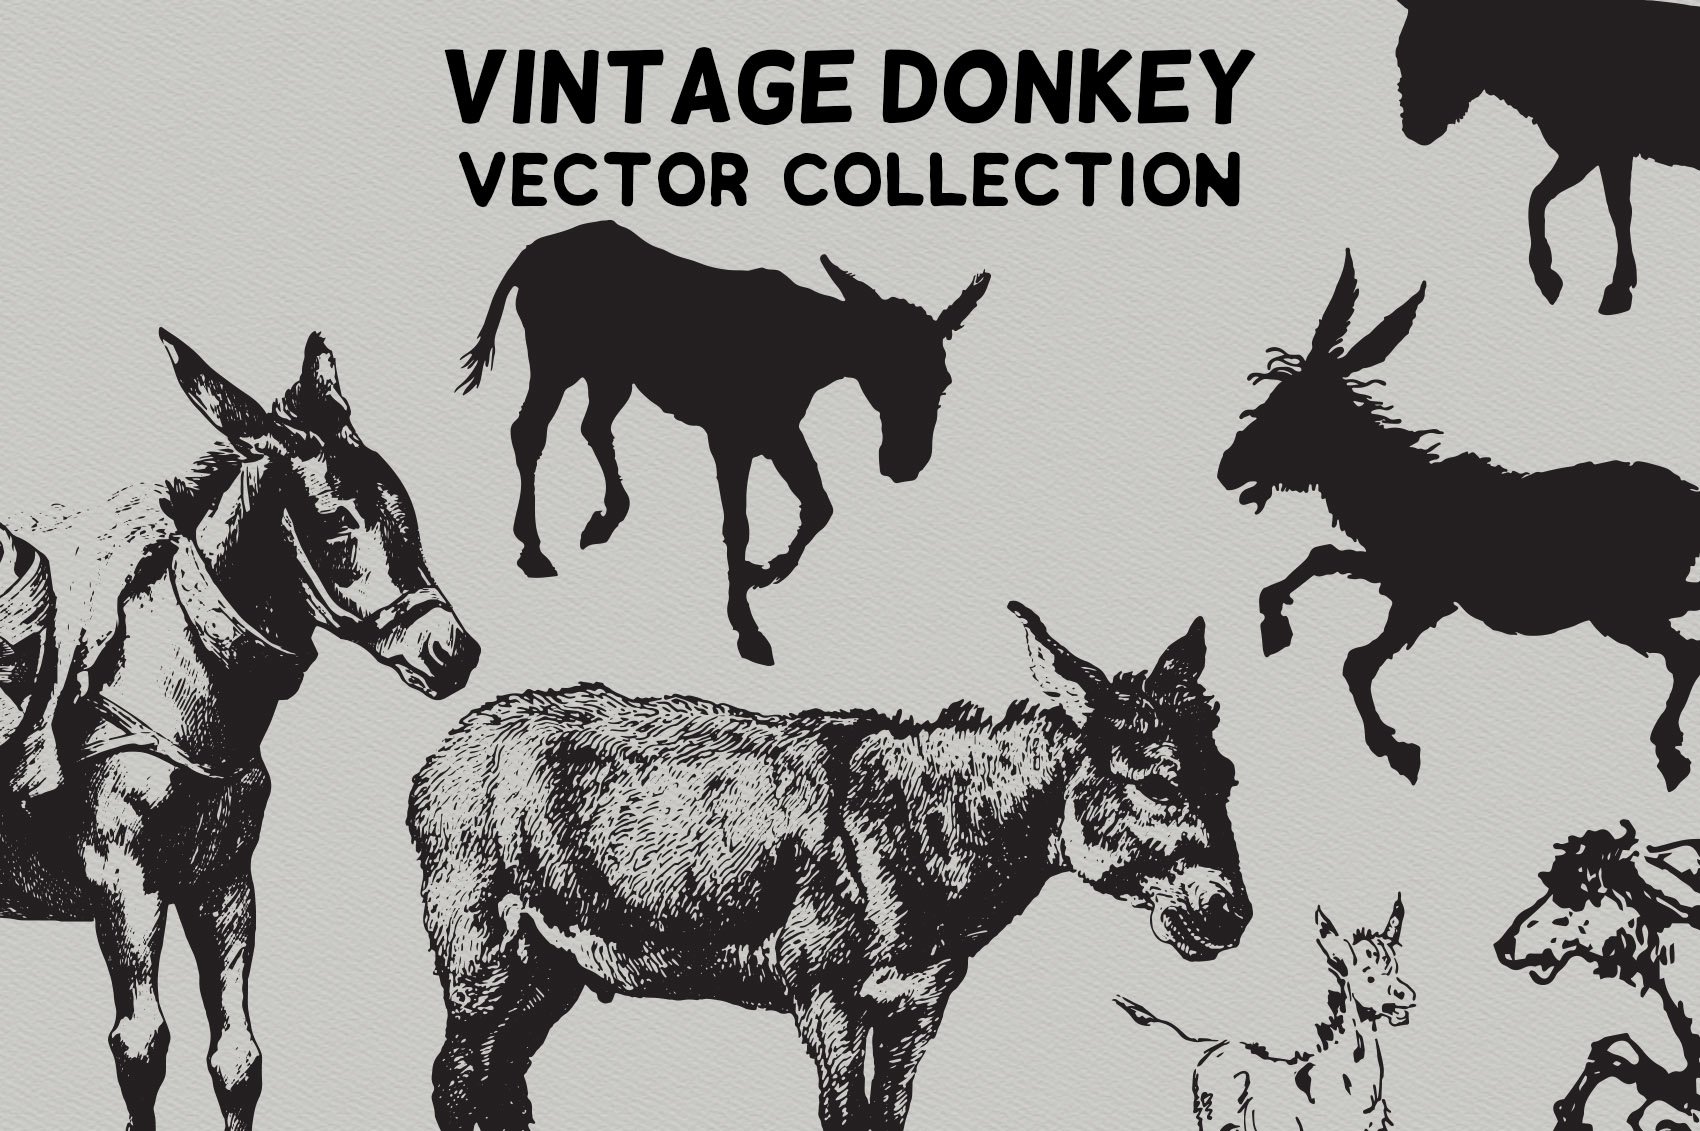 Vintage donkey collection for your purposes.